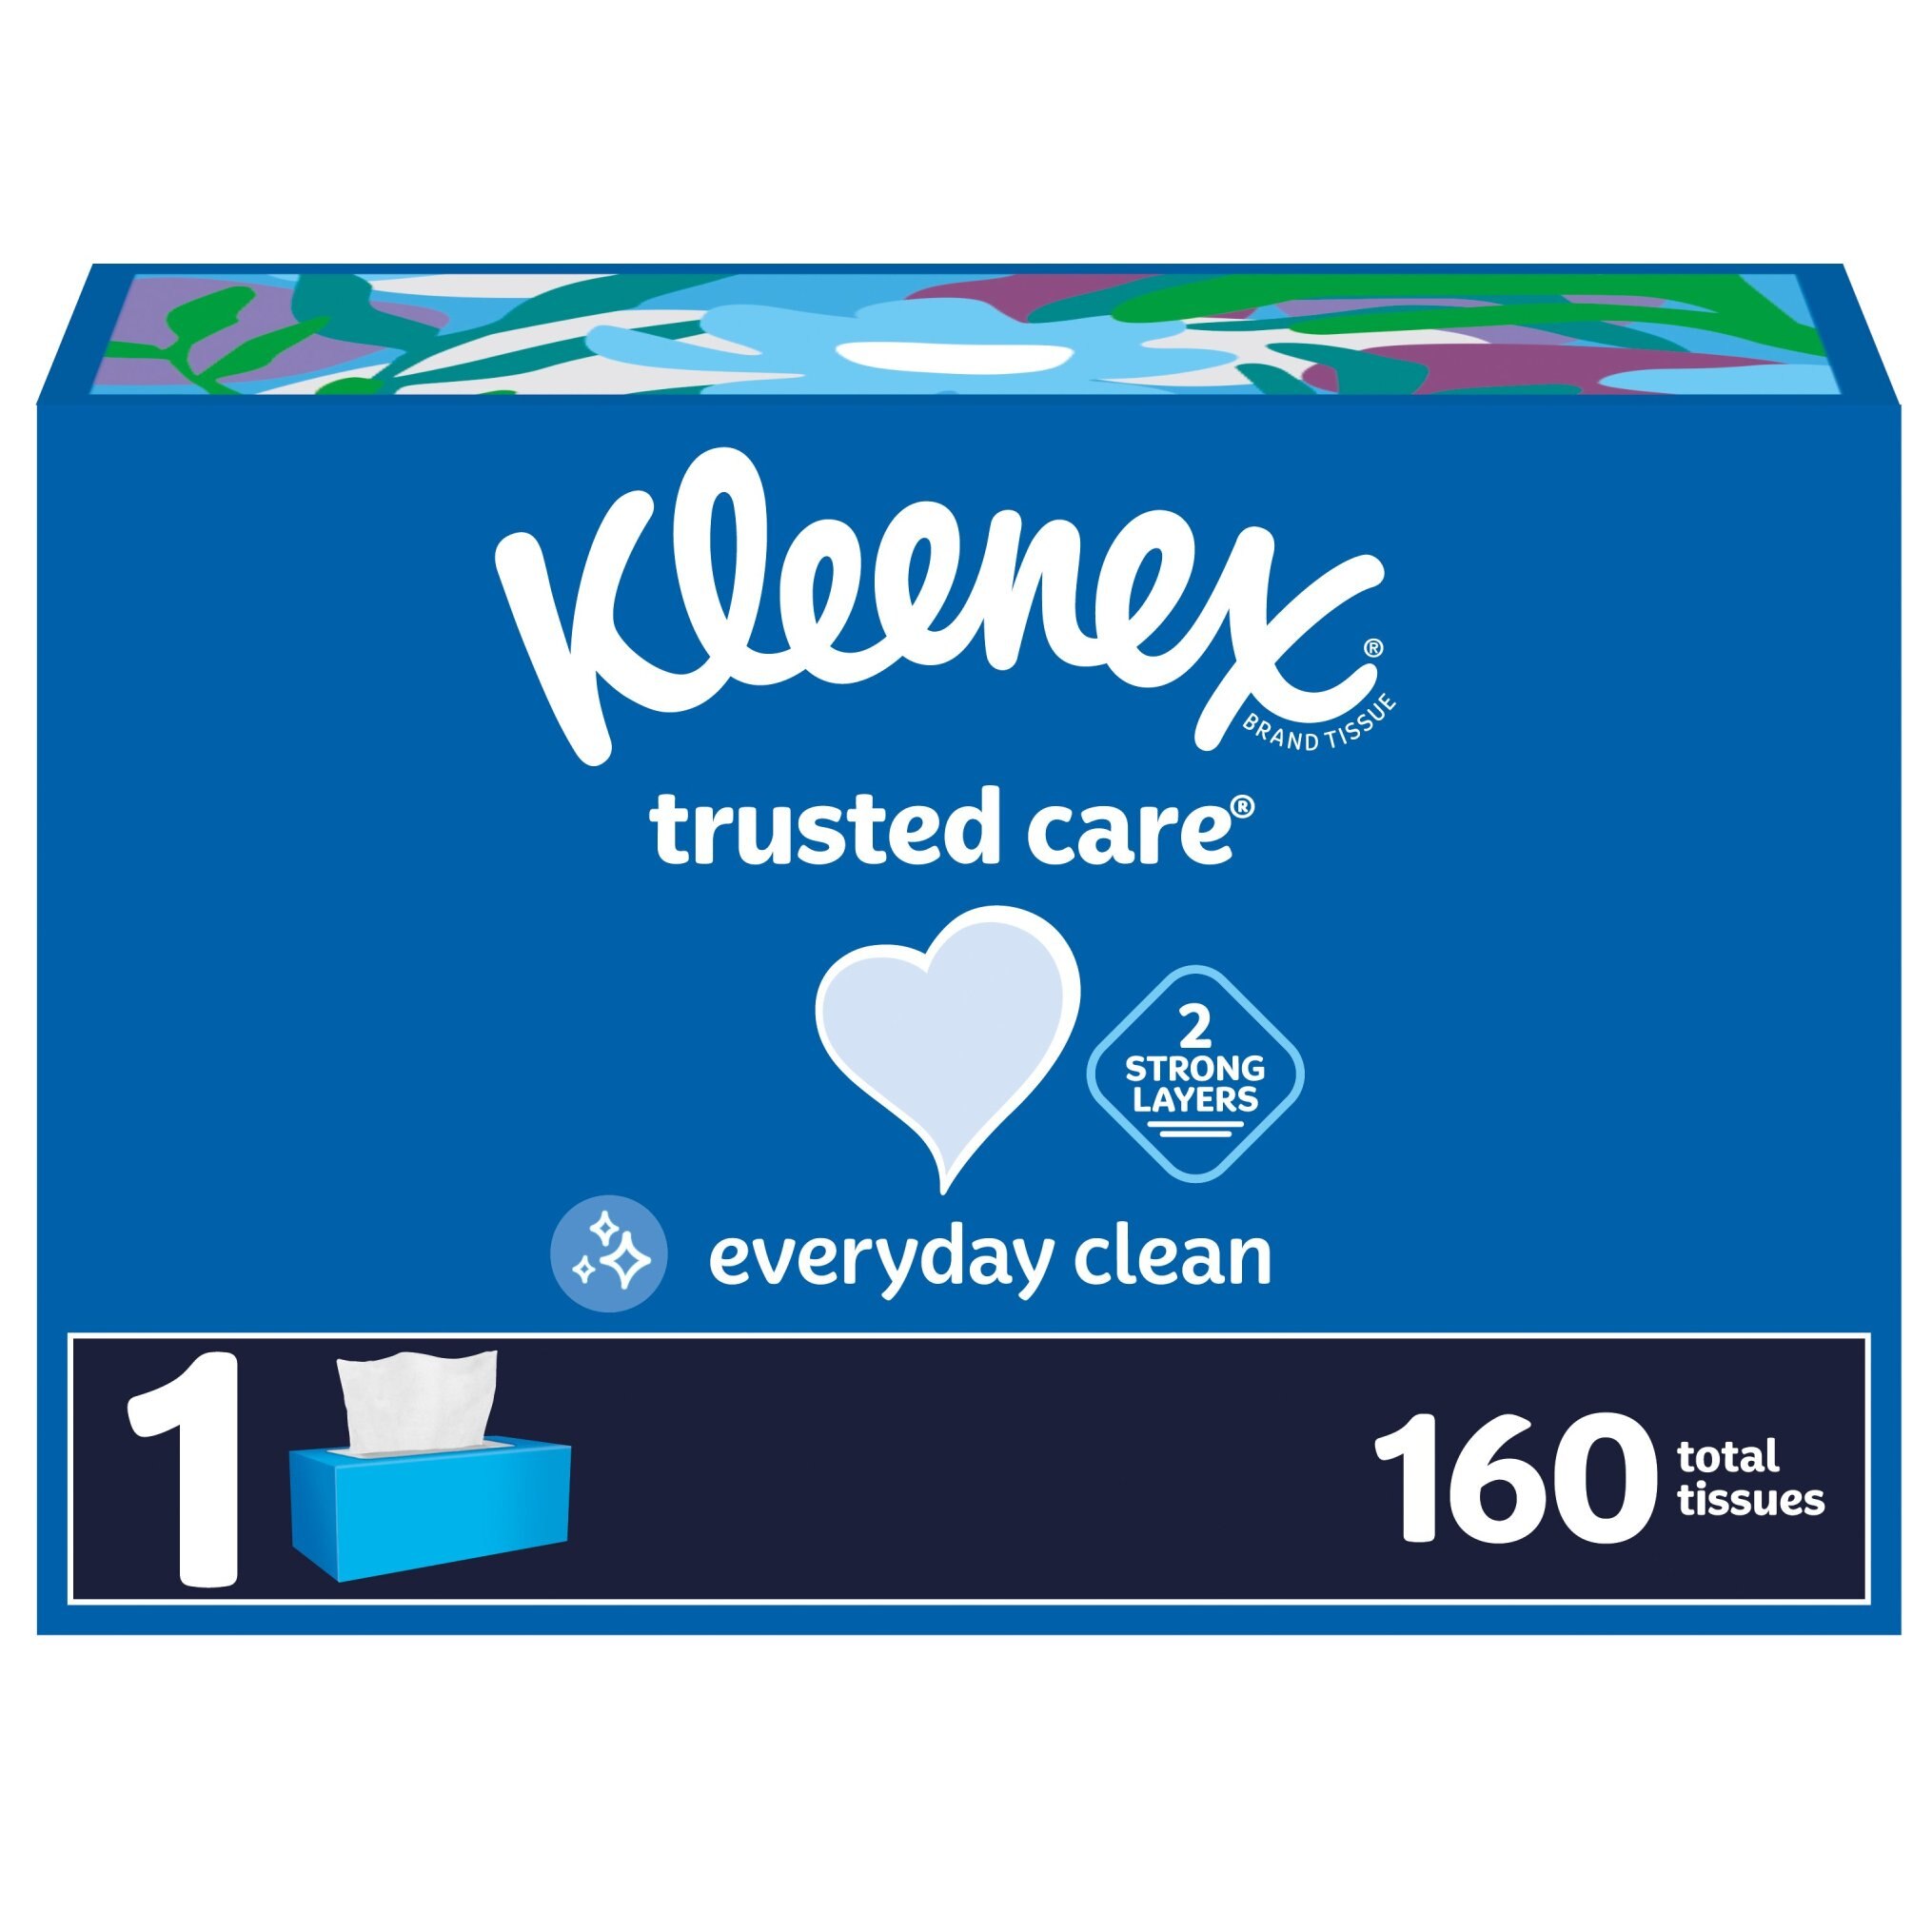 Kleenex Trusted Care Facial Tissues, 1 Flat Box, 160 Tissues per Box, 2-Ply (160 Total Tissues)